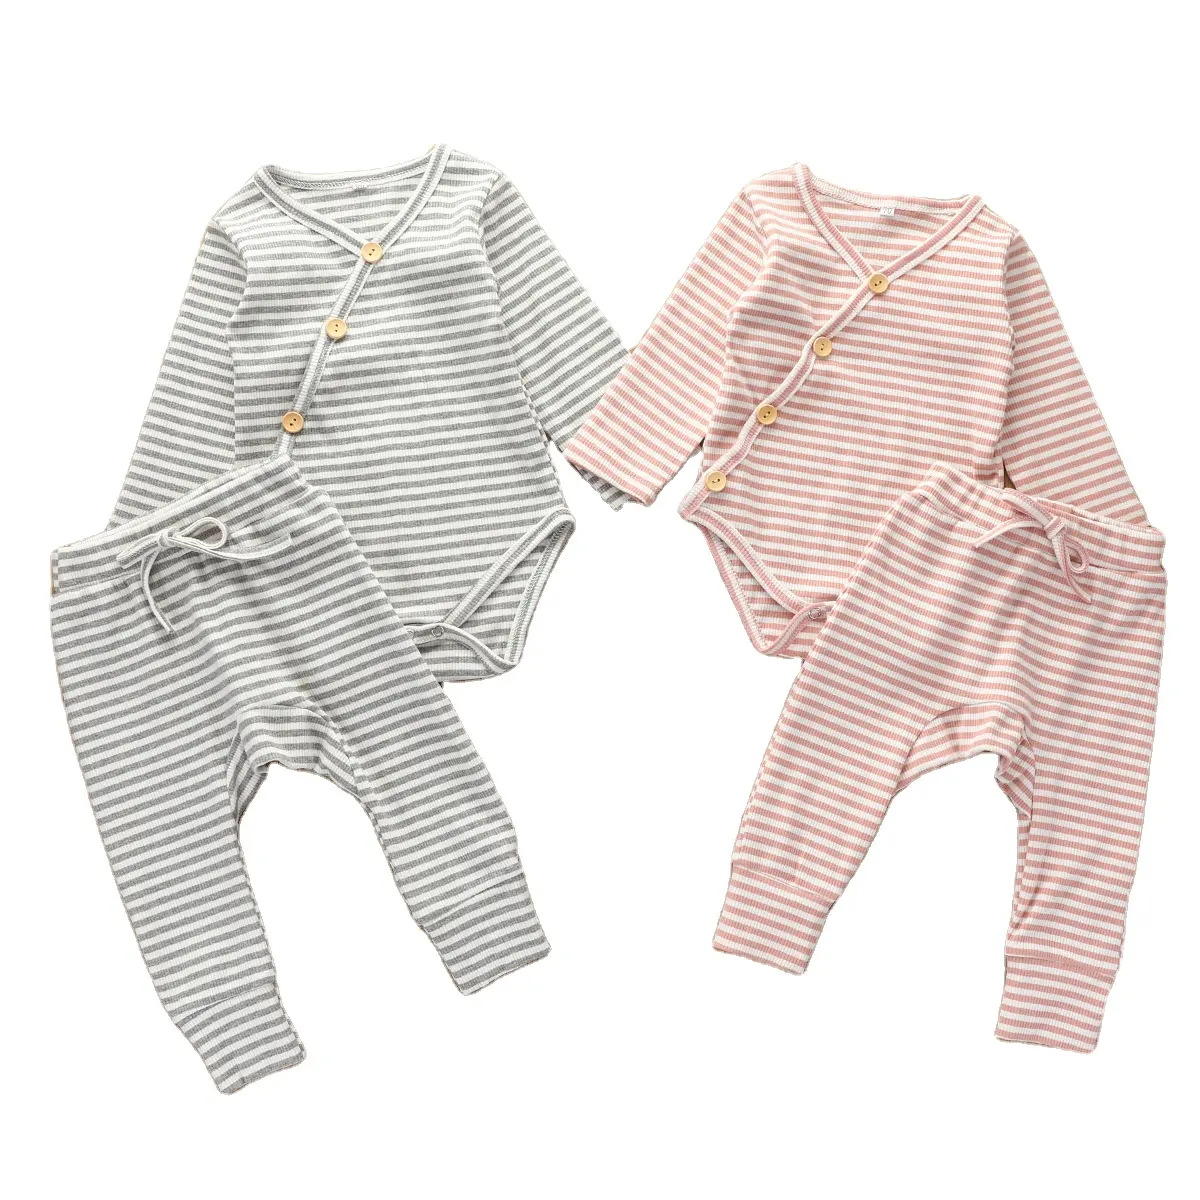 Toddler Girls Clothes Ribbed Cotton Kimono Striped Romper Jogger Pant Outfit Fall Baby Clothing Sets